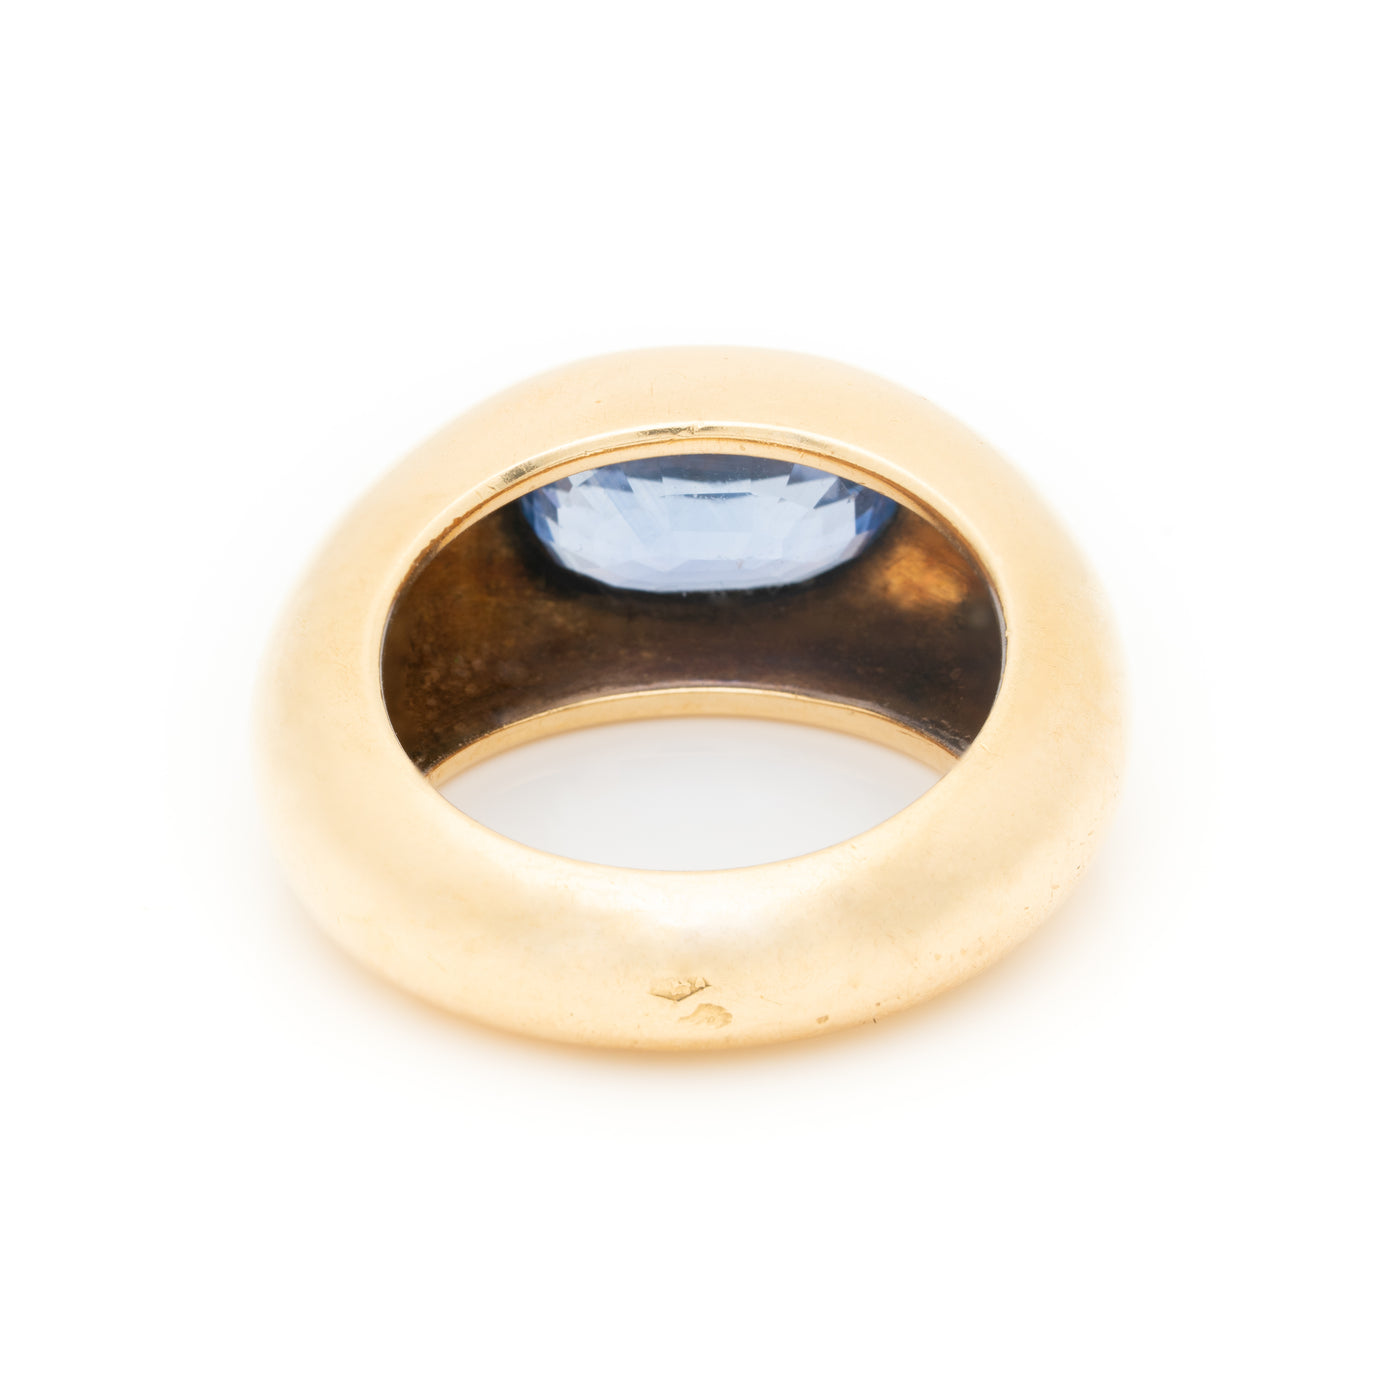 VINTAGE FRENCH 18K YELLOW GOLD 2.76 CTS. CEYLON SAPPHIRE c.1980s